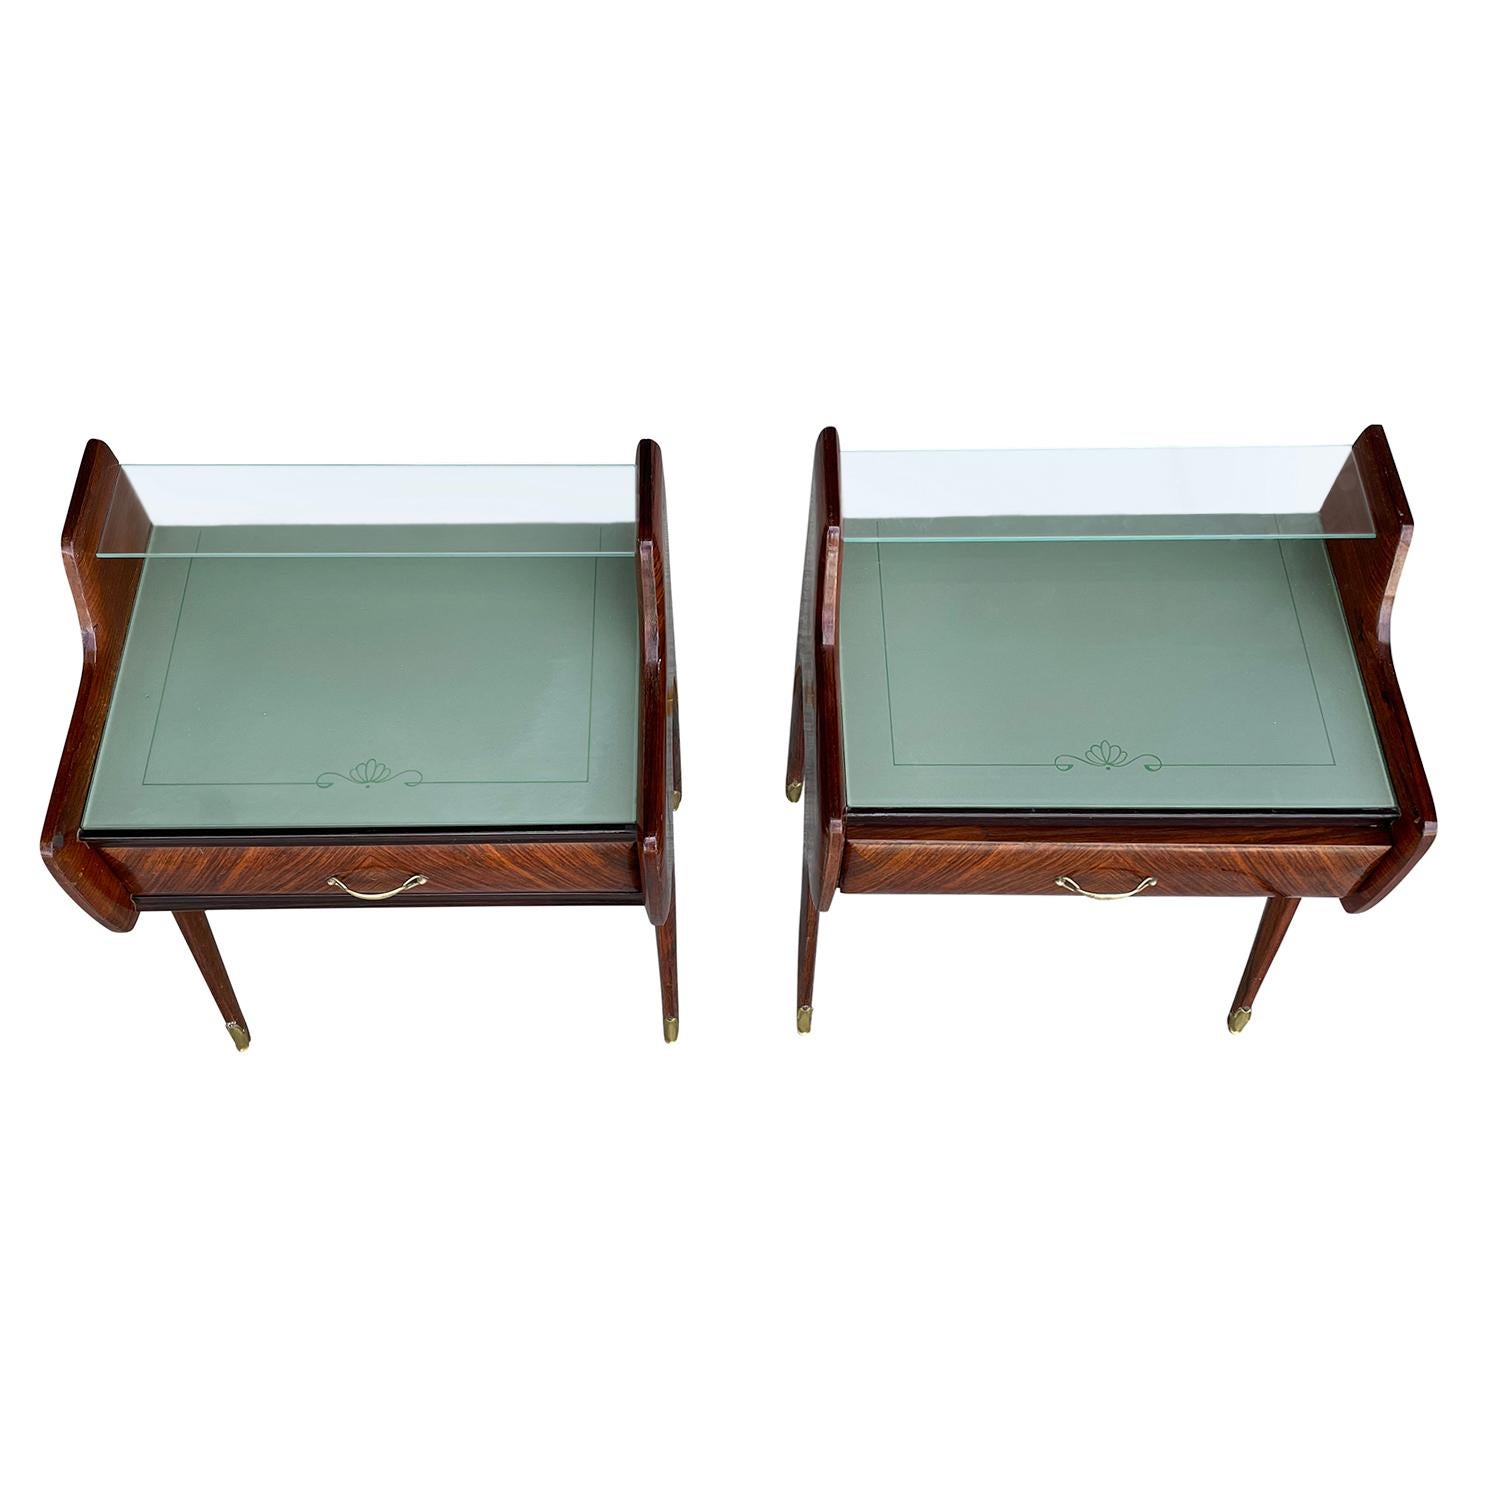 Hand-Carved 20th Century Pair of Italian Nightstands, Rosewood Side Tables by Paolo Buffa